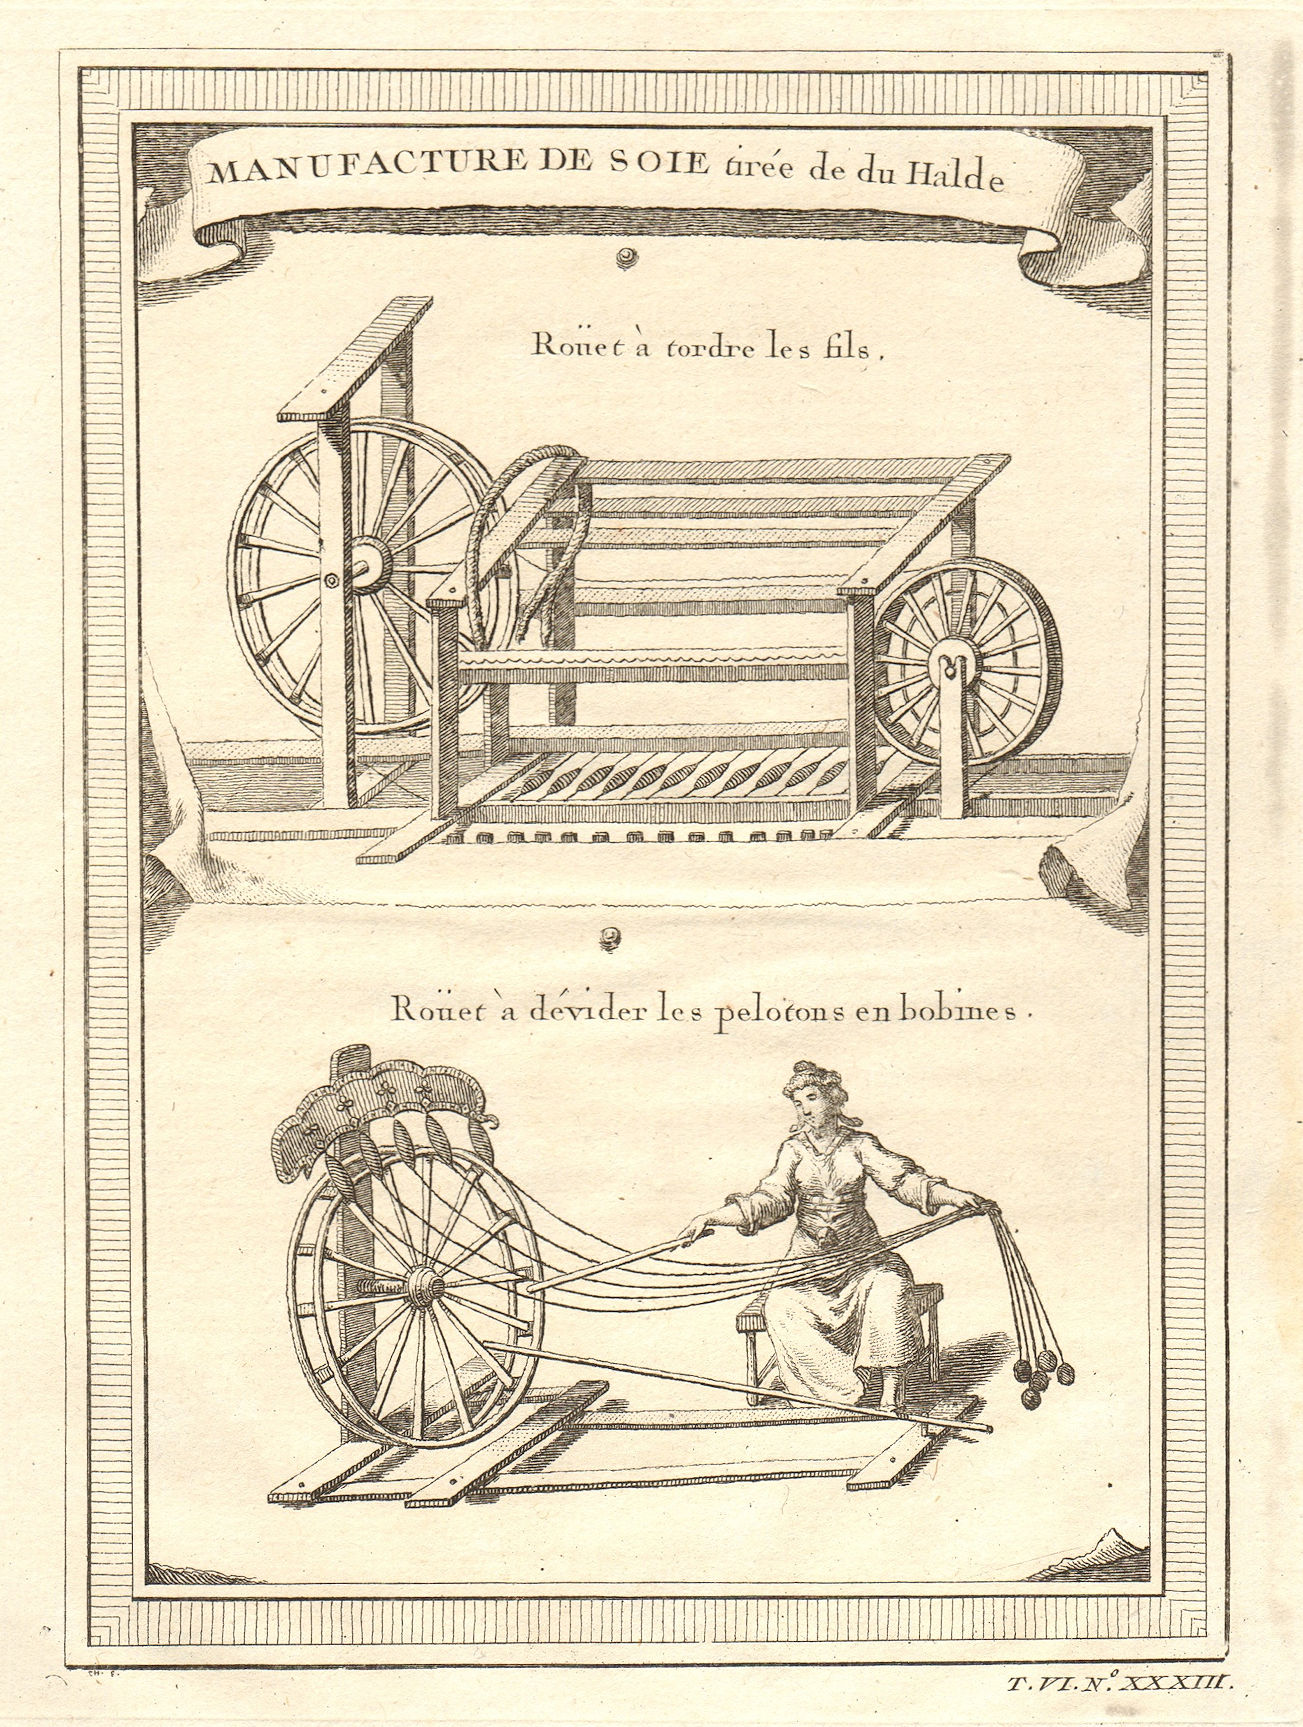 Associate Product China. Silk manufacture. Twine mill. Spinning wheel threads bobbins 1748 print